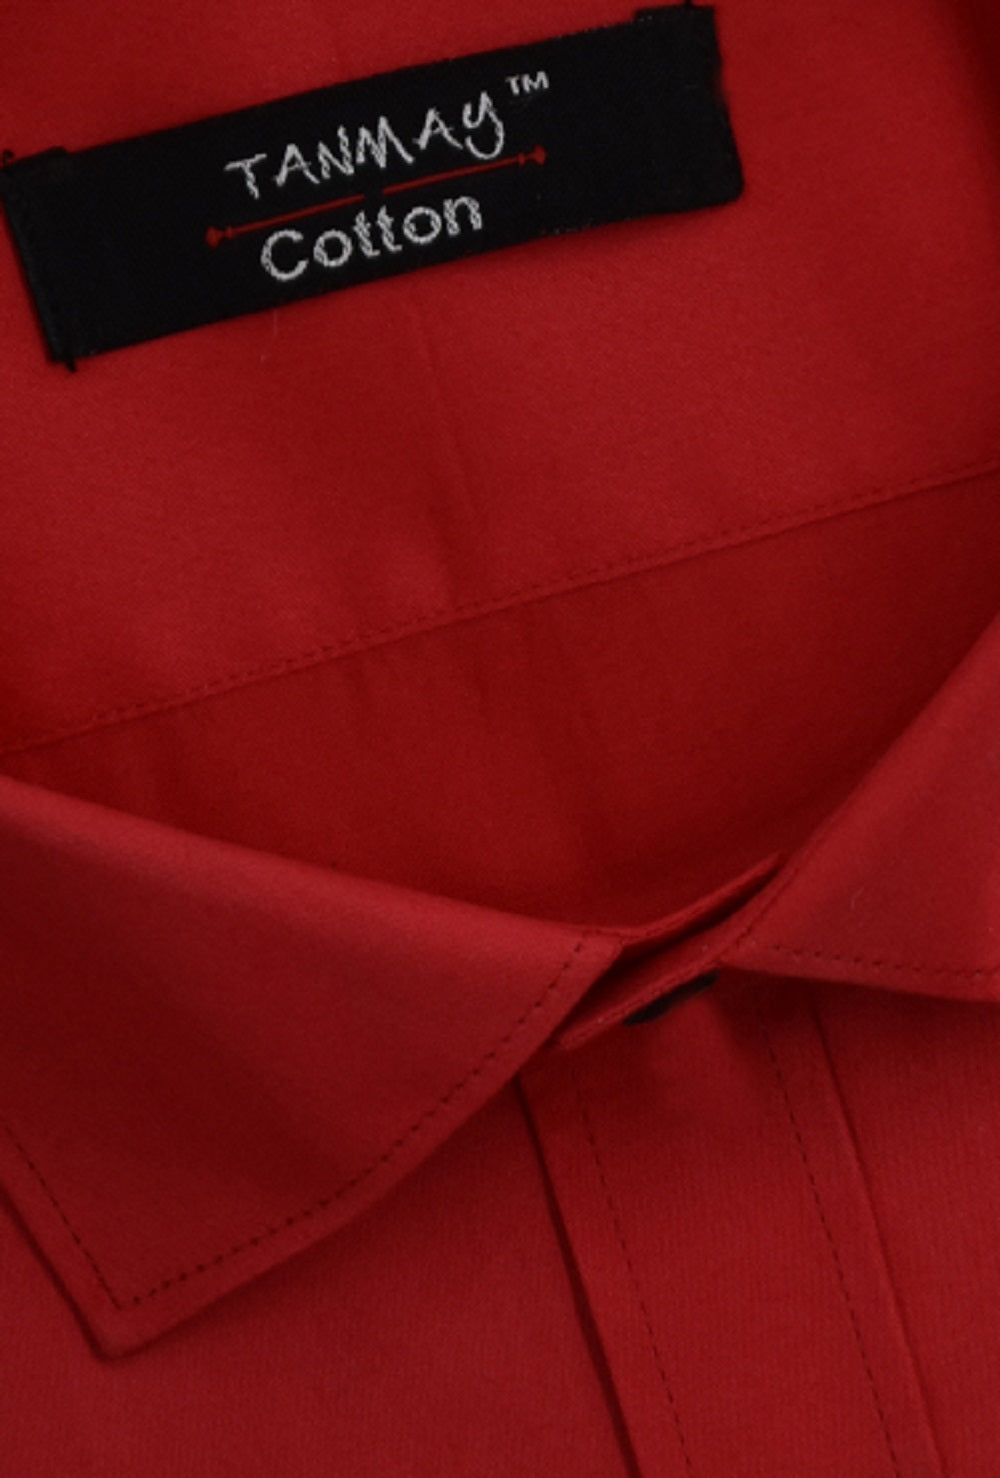 Cotton Tanmay Red Color Formal Shirt for Men's